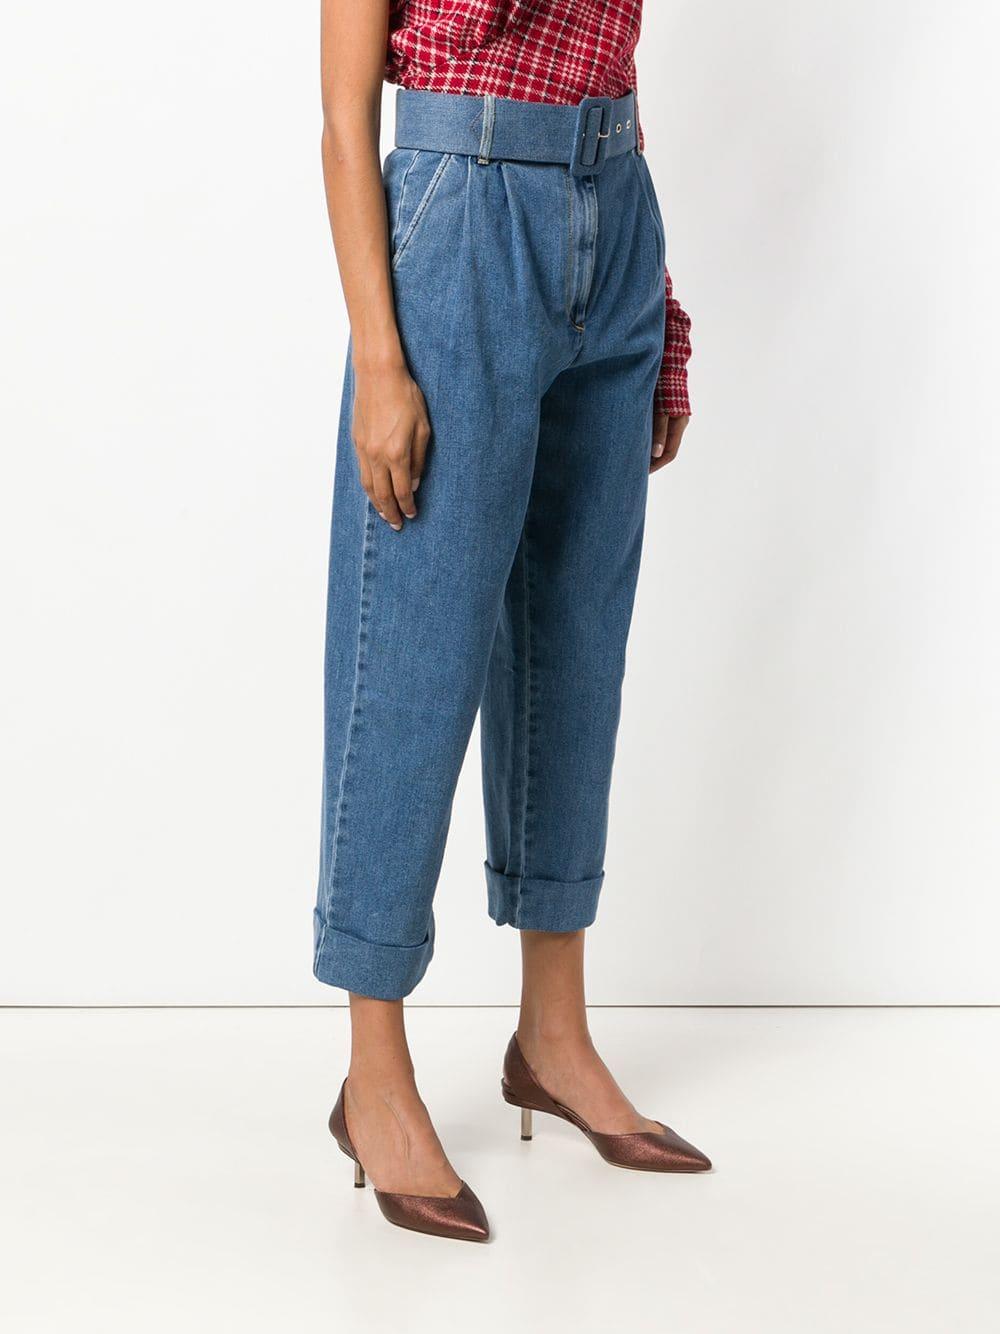 Isa Arfen High-waisted Belted Jeans in Blue | Lyst